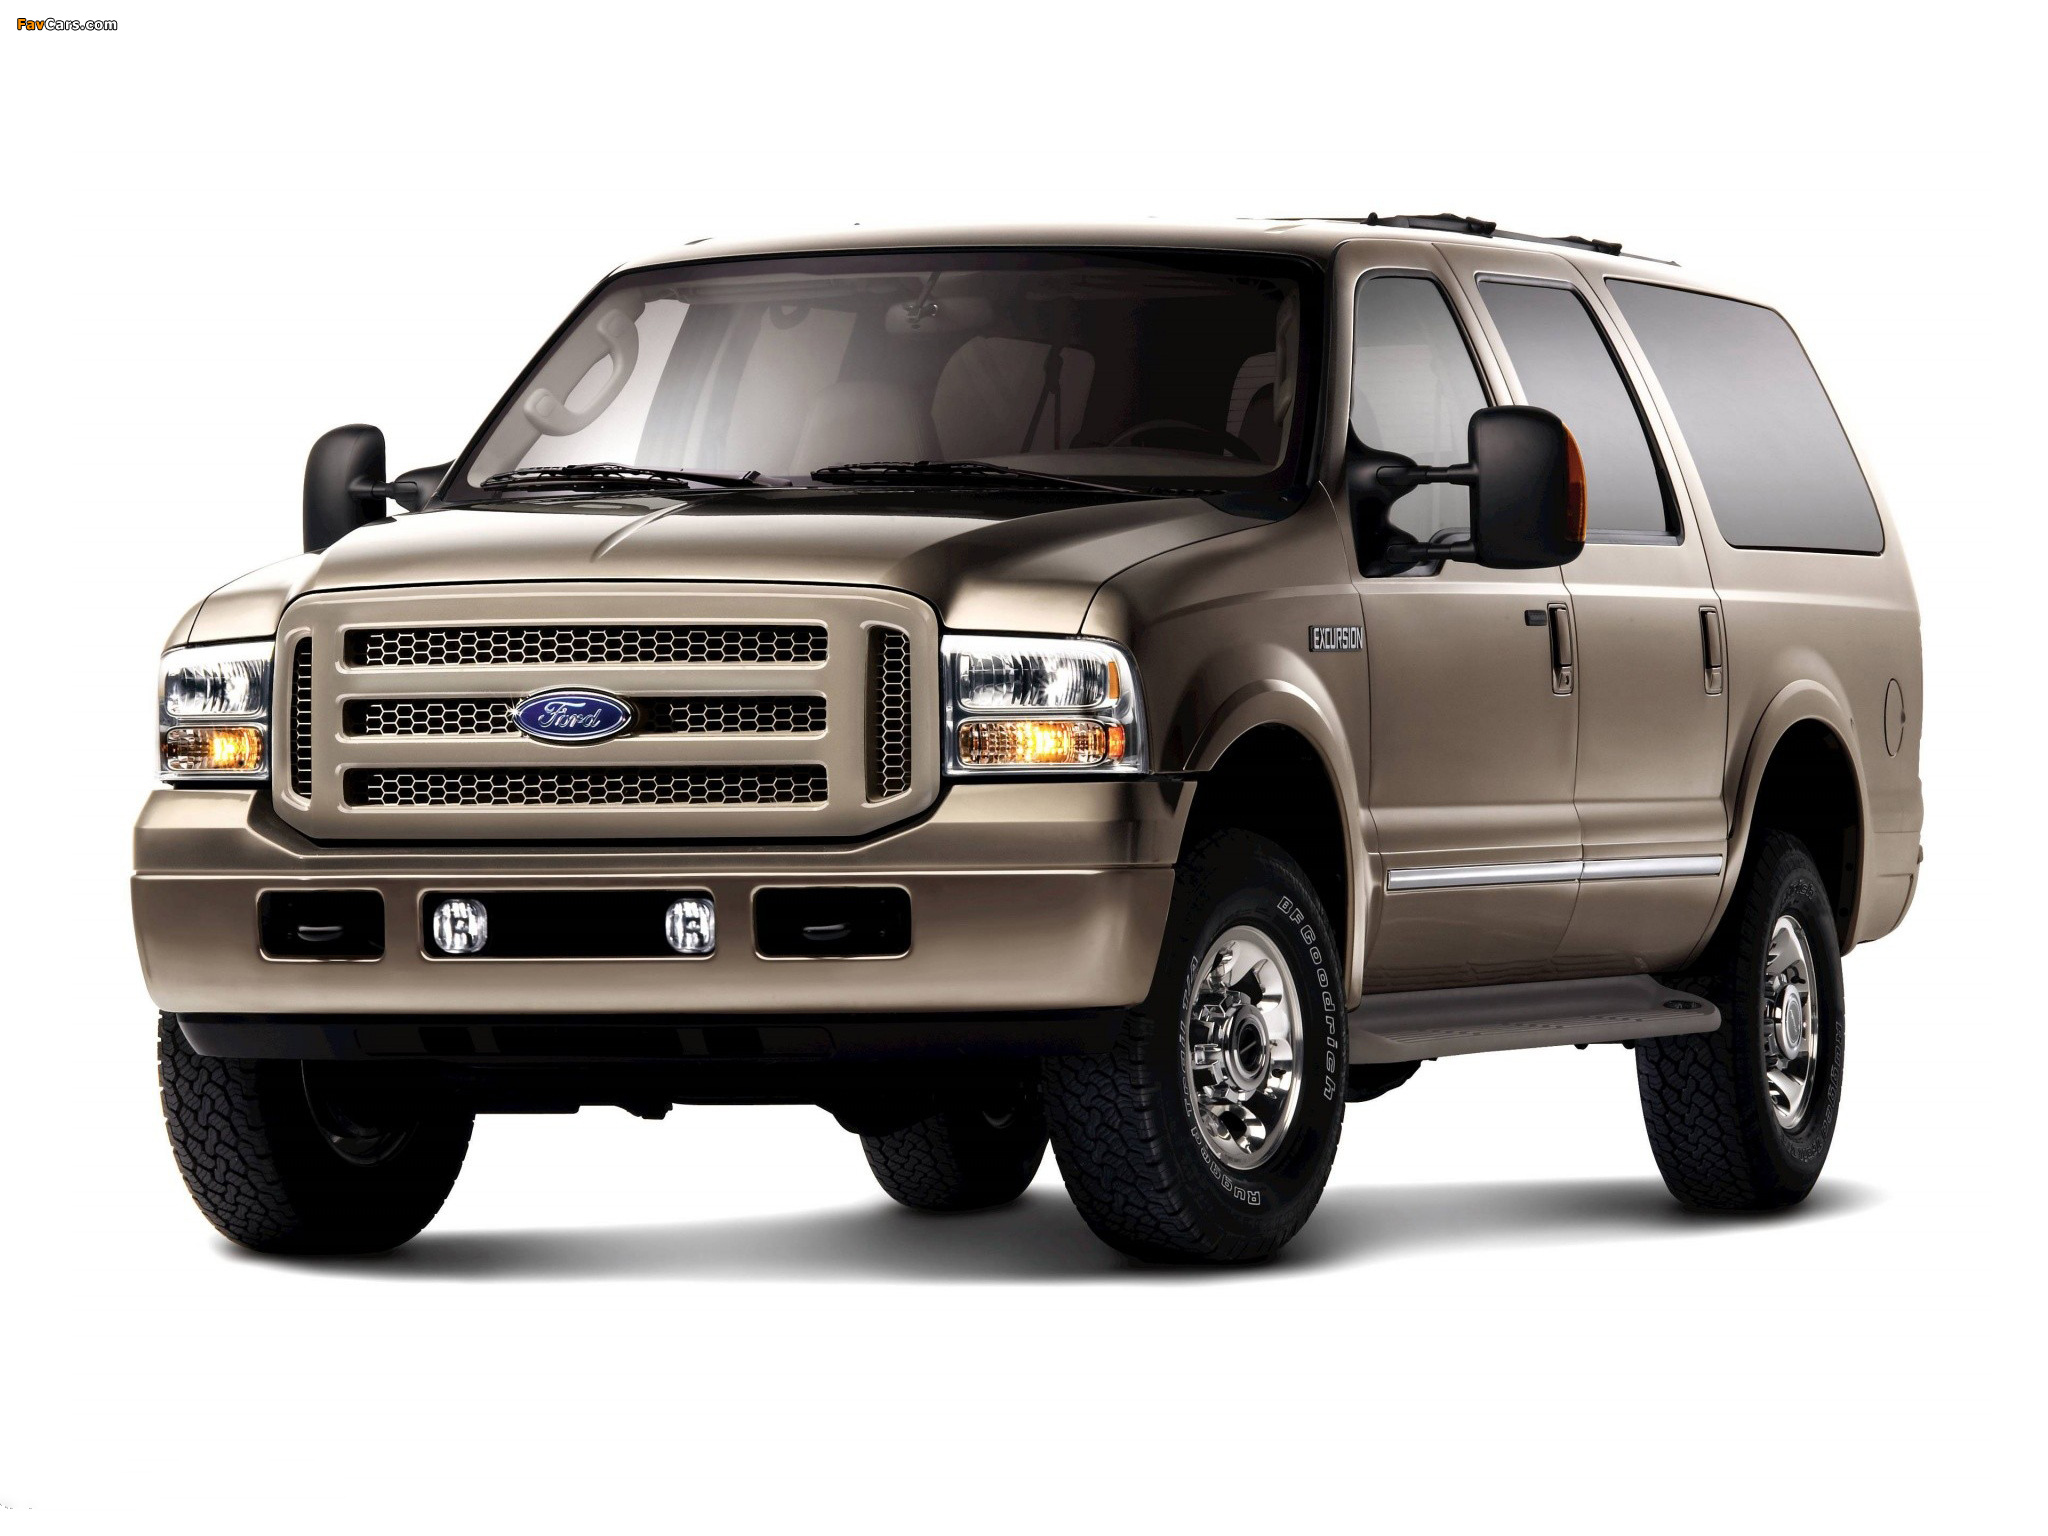 2004 ford excursion configurations